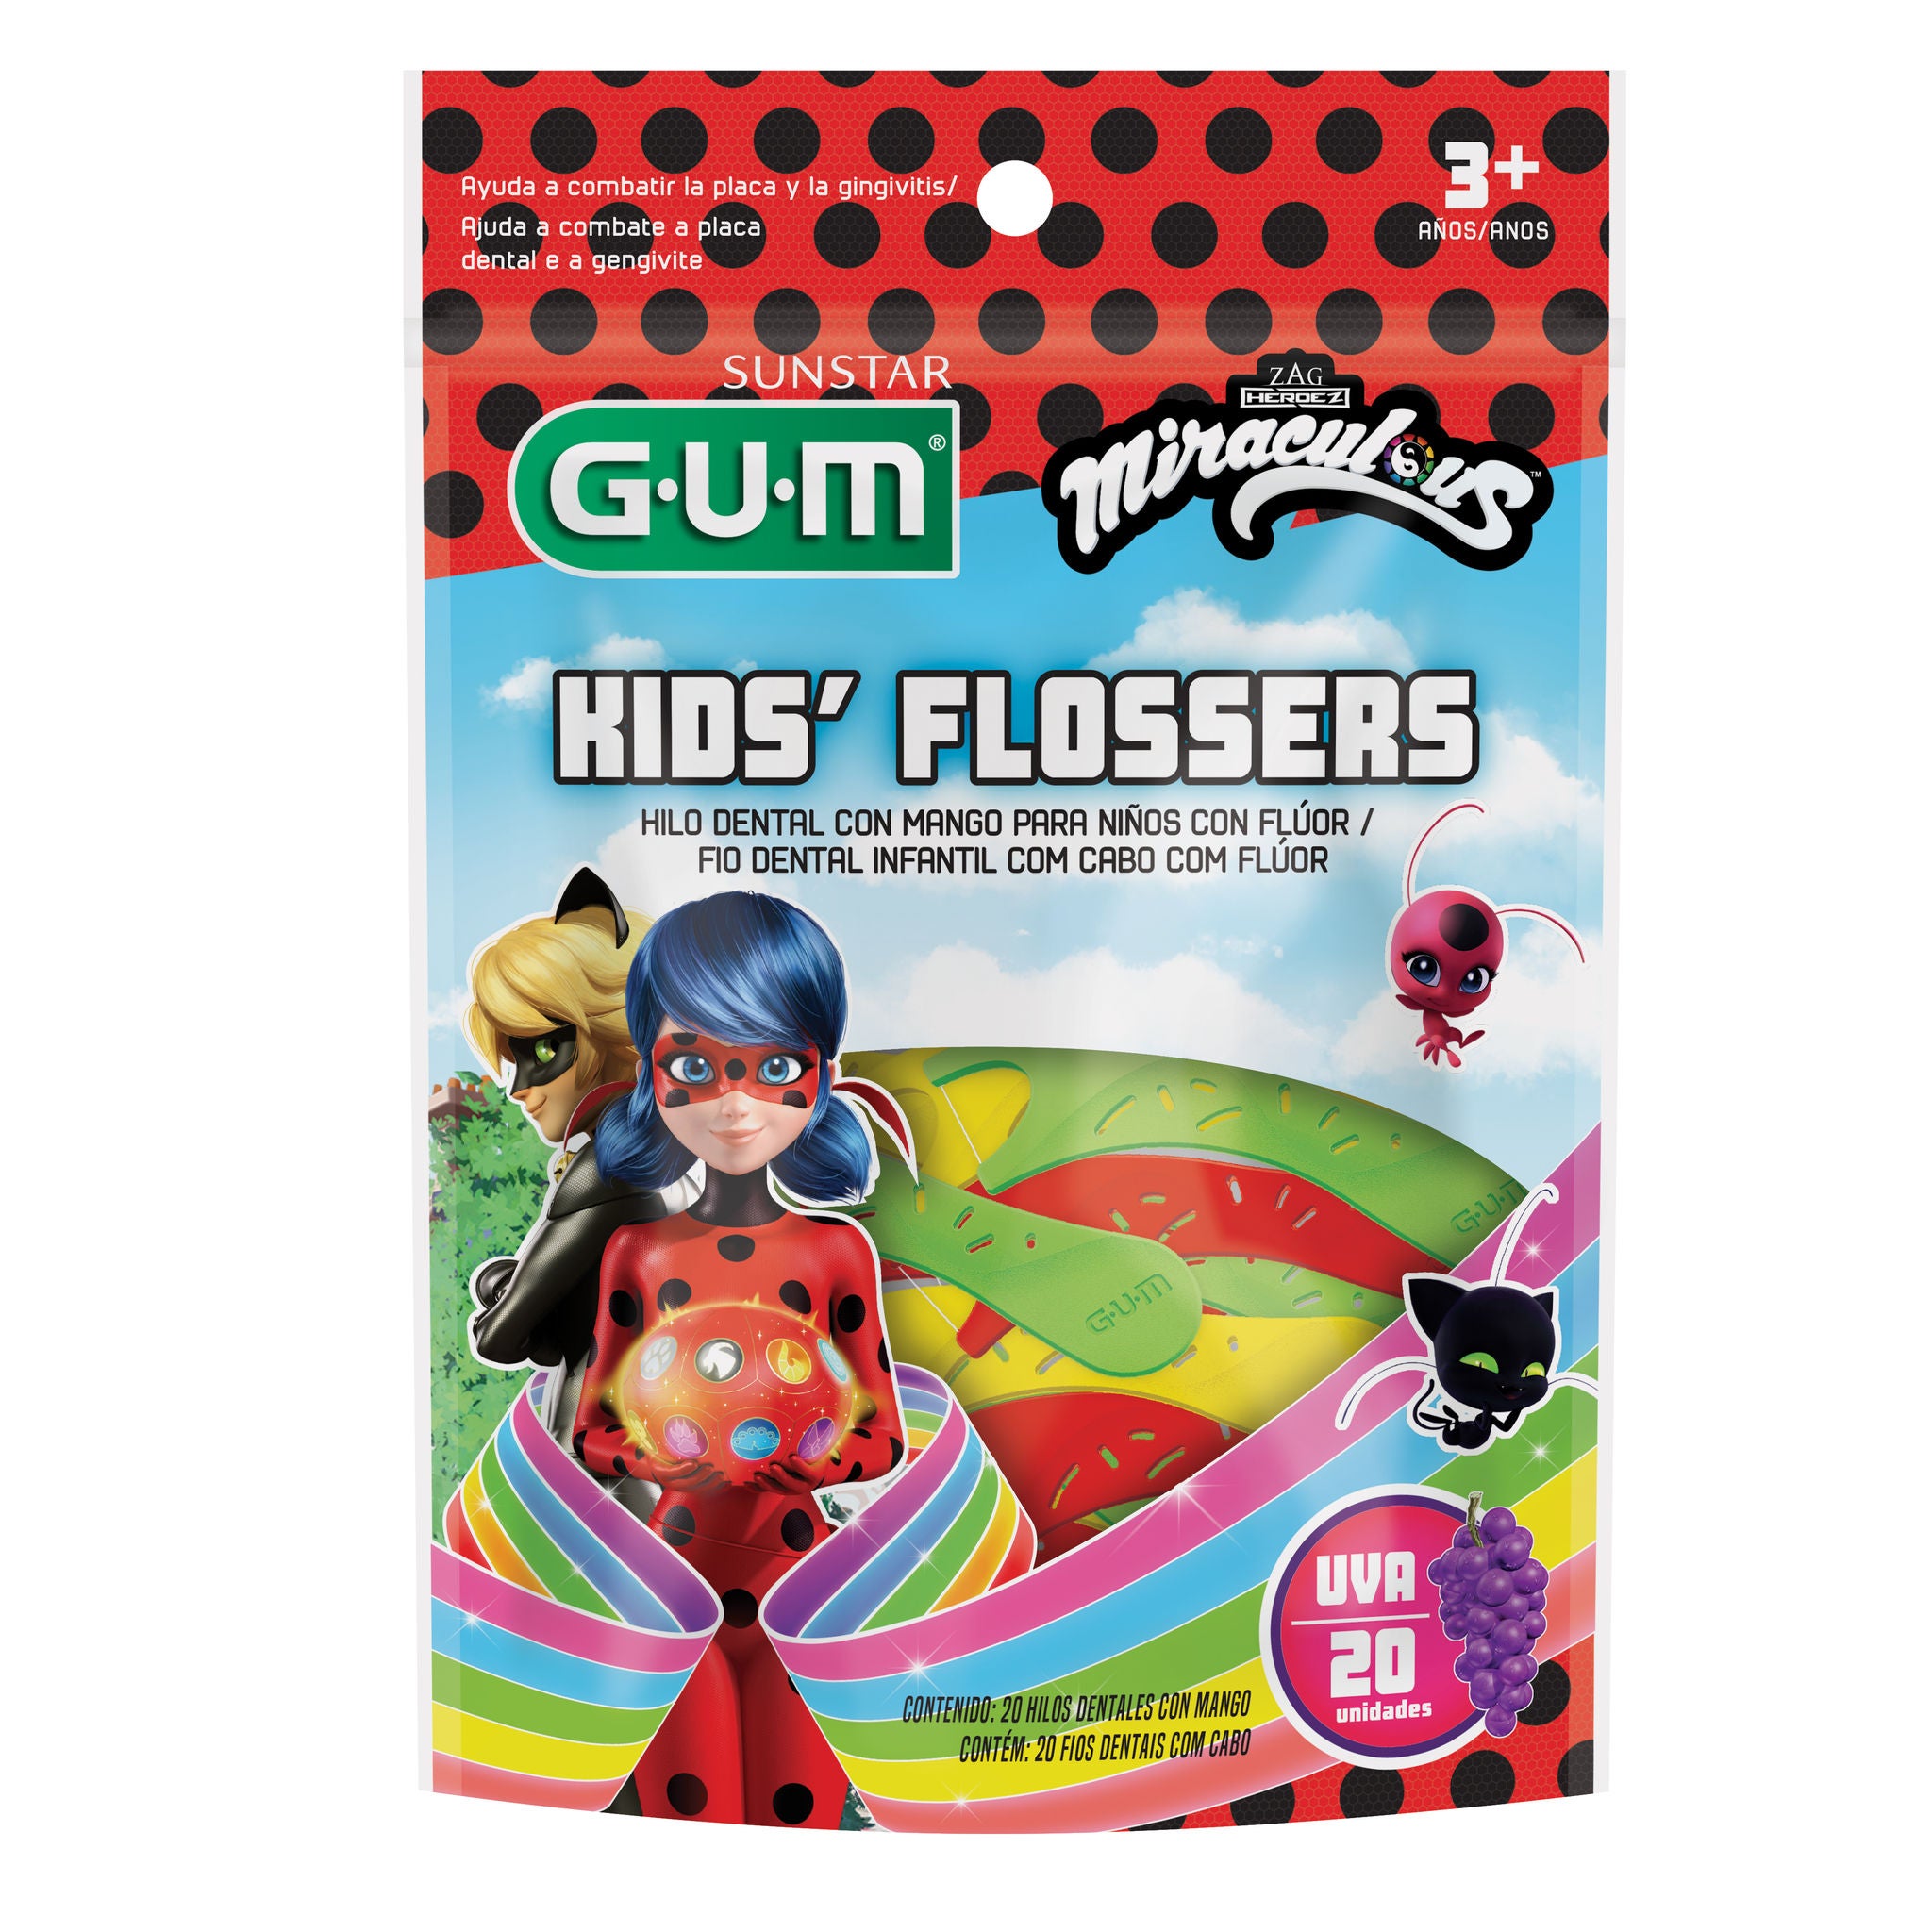 875BUG-Product-Packaging-Flossers-Ladybug-front-20ct.jpg